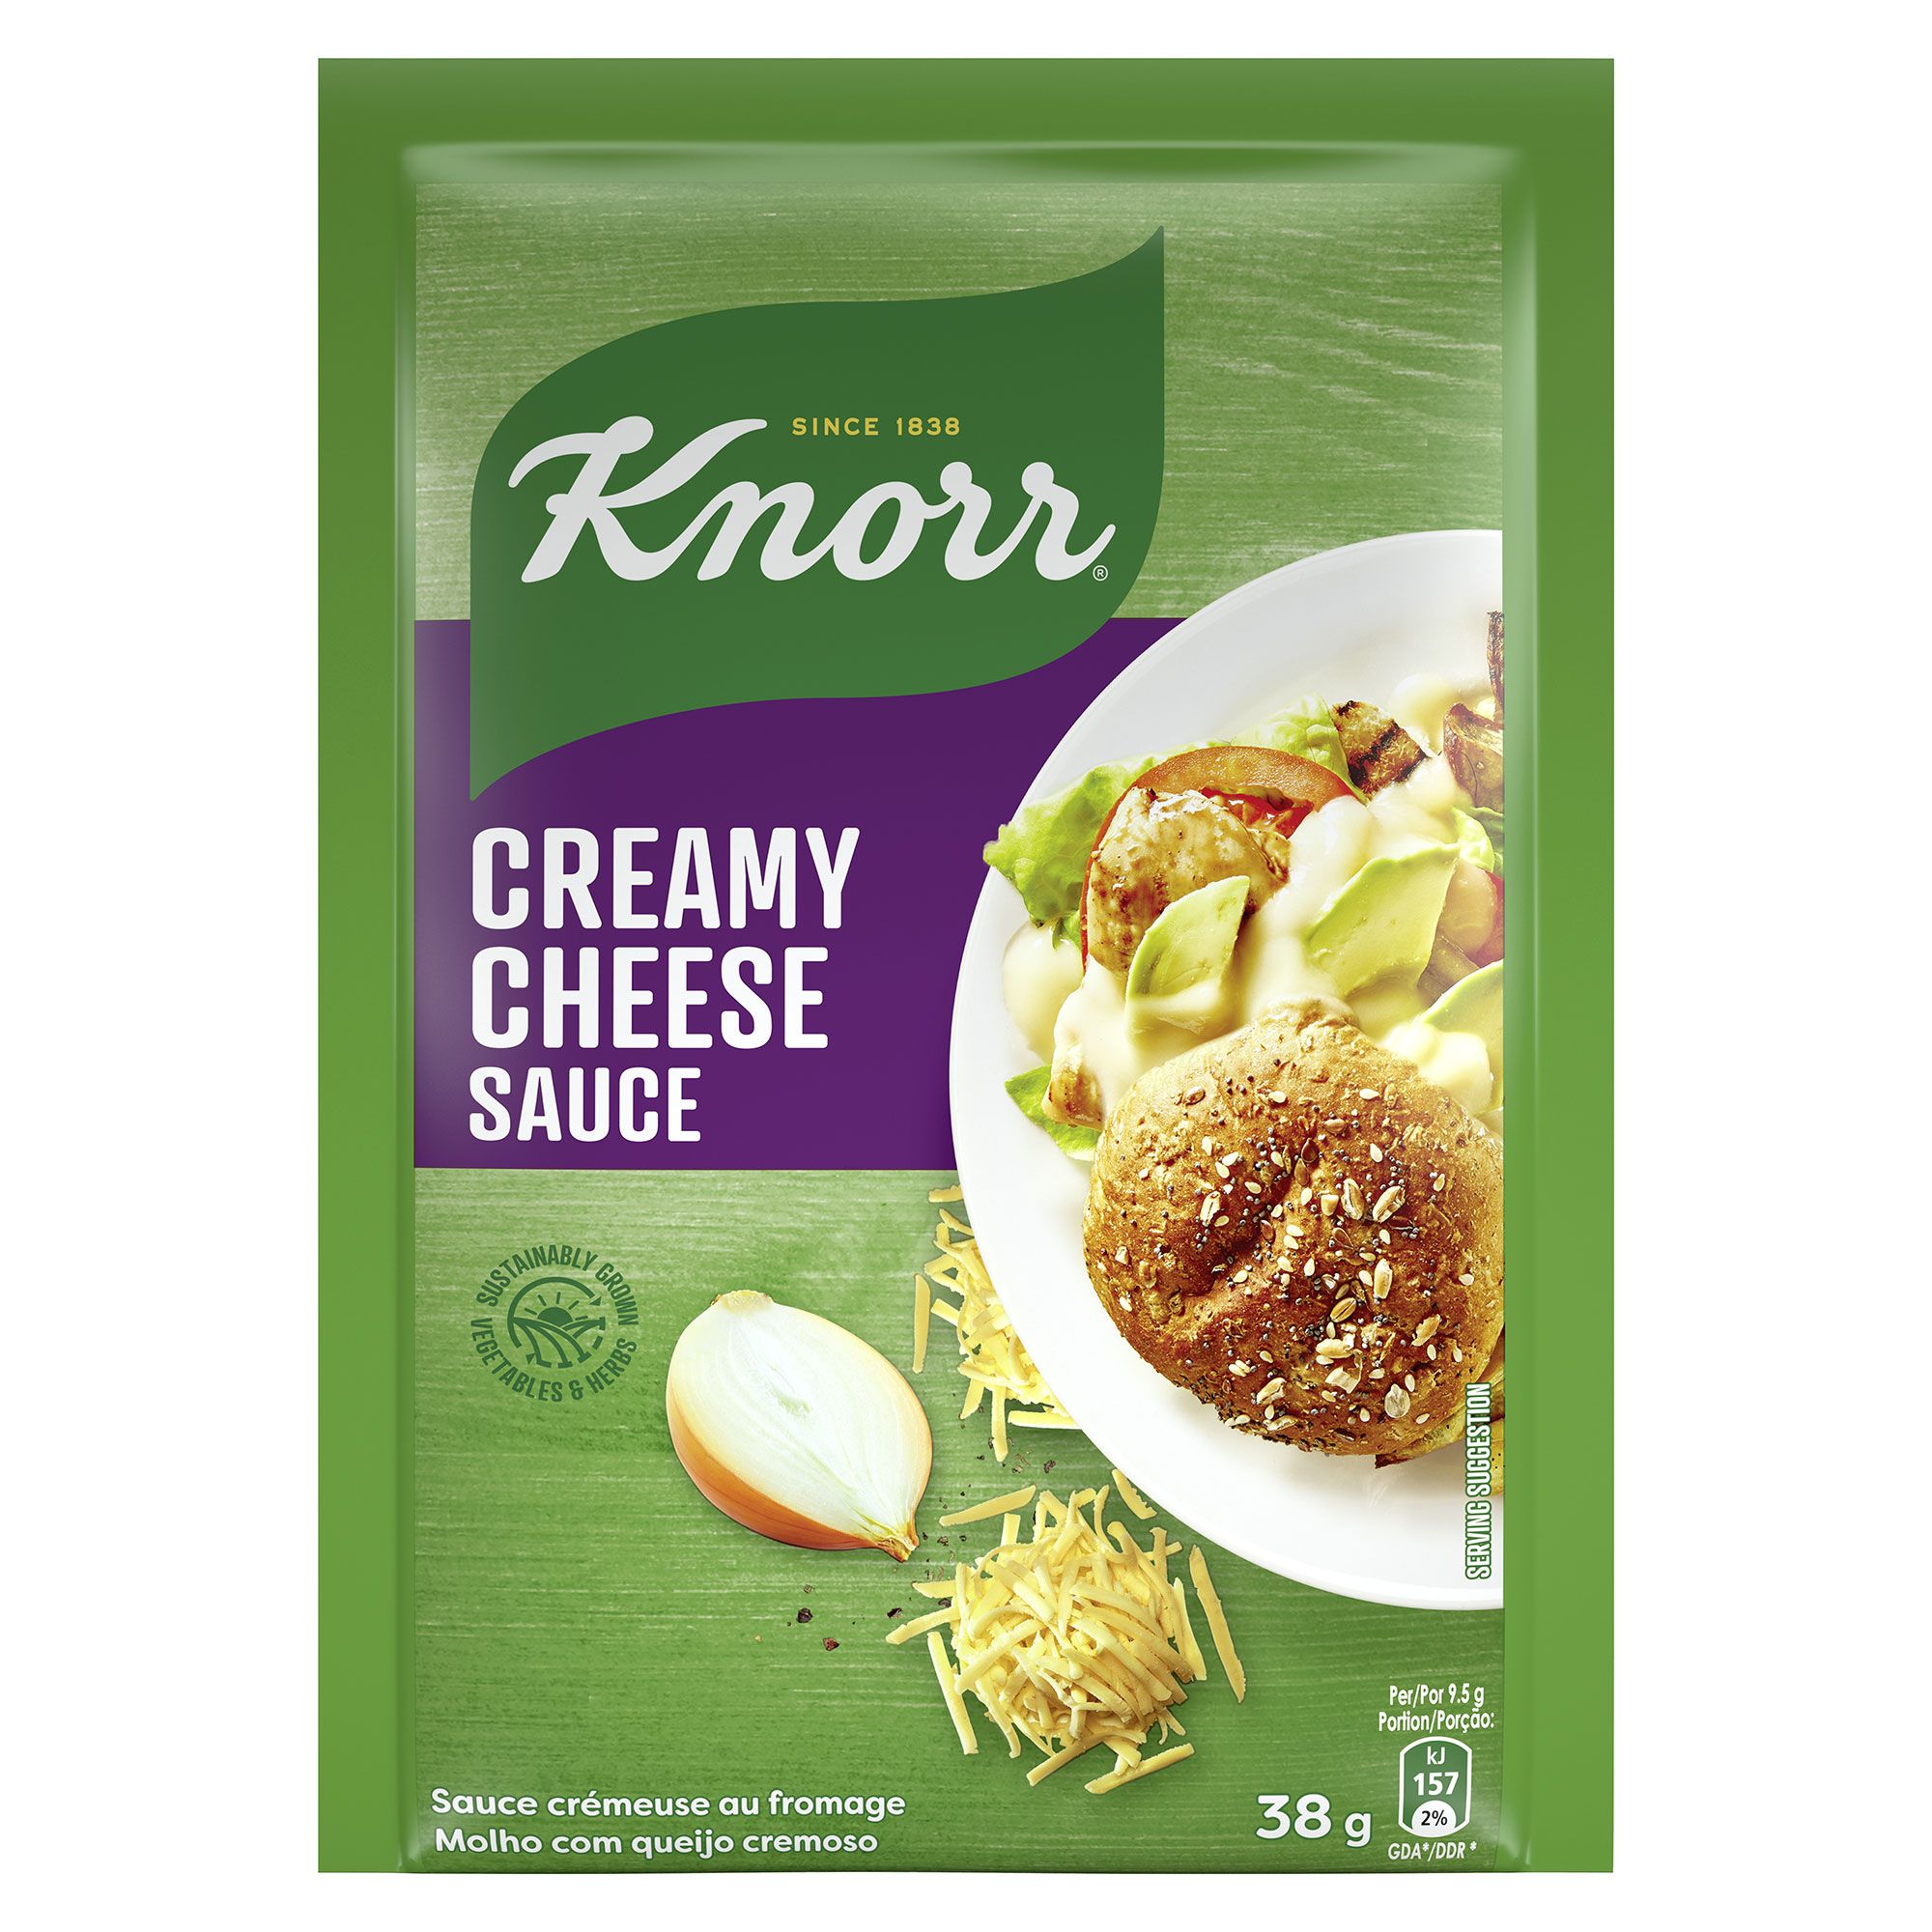 Knorr Creamy Cheese Instant Sauce